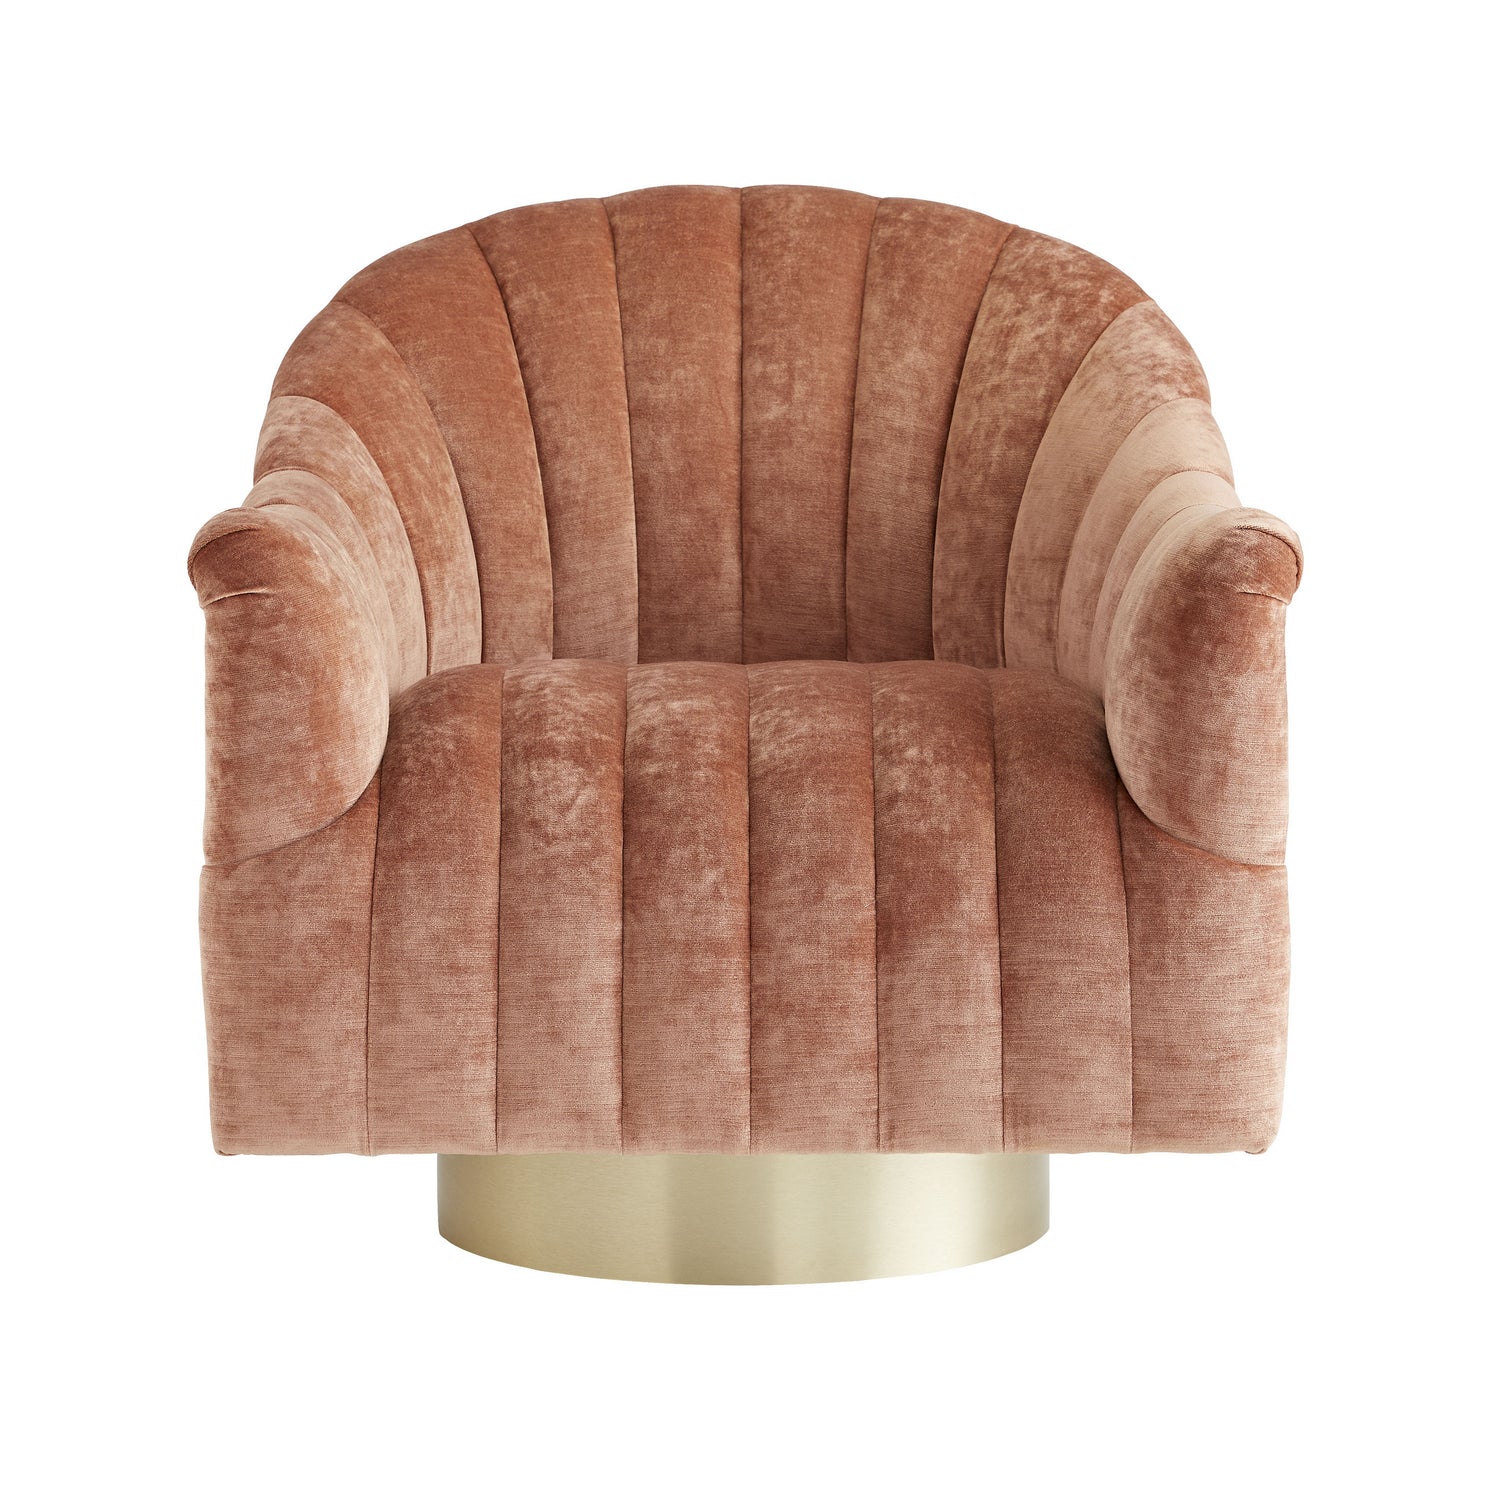 Chair from the Springsteen collection in Dusty Rose finish